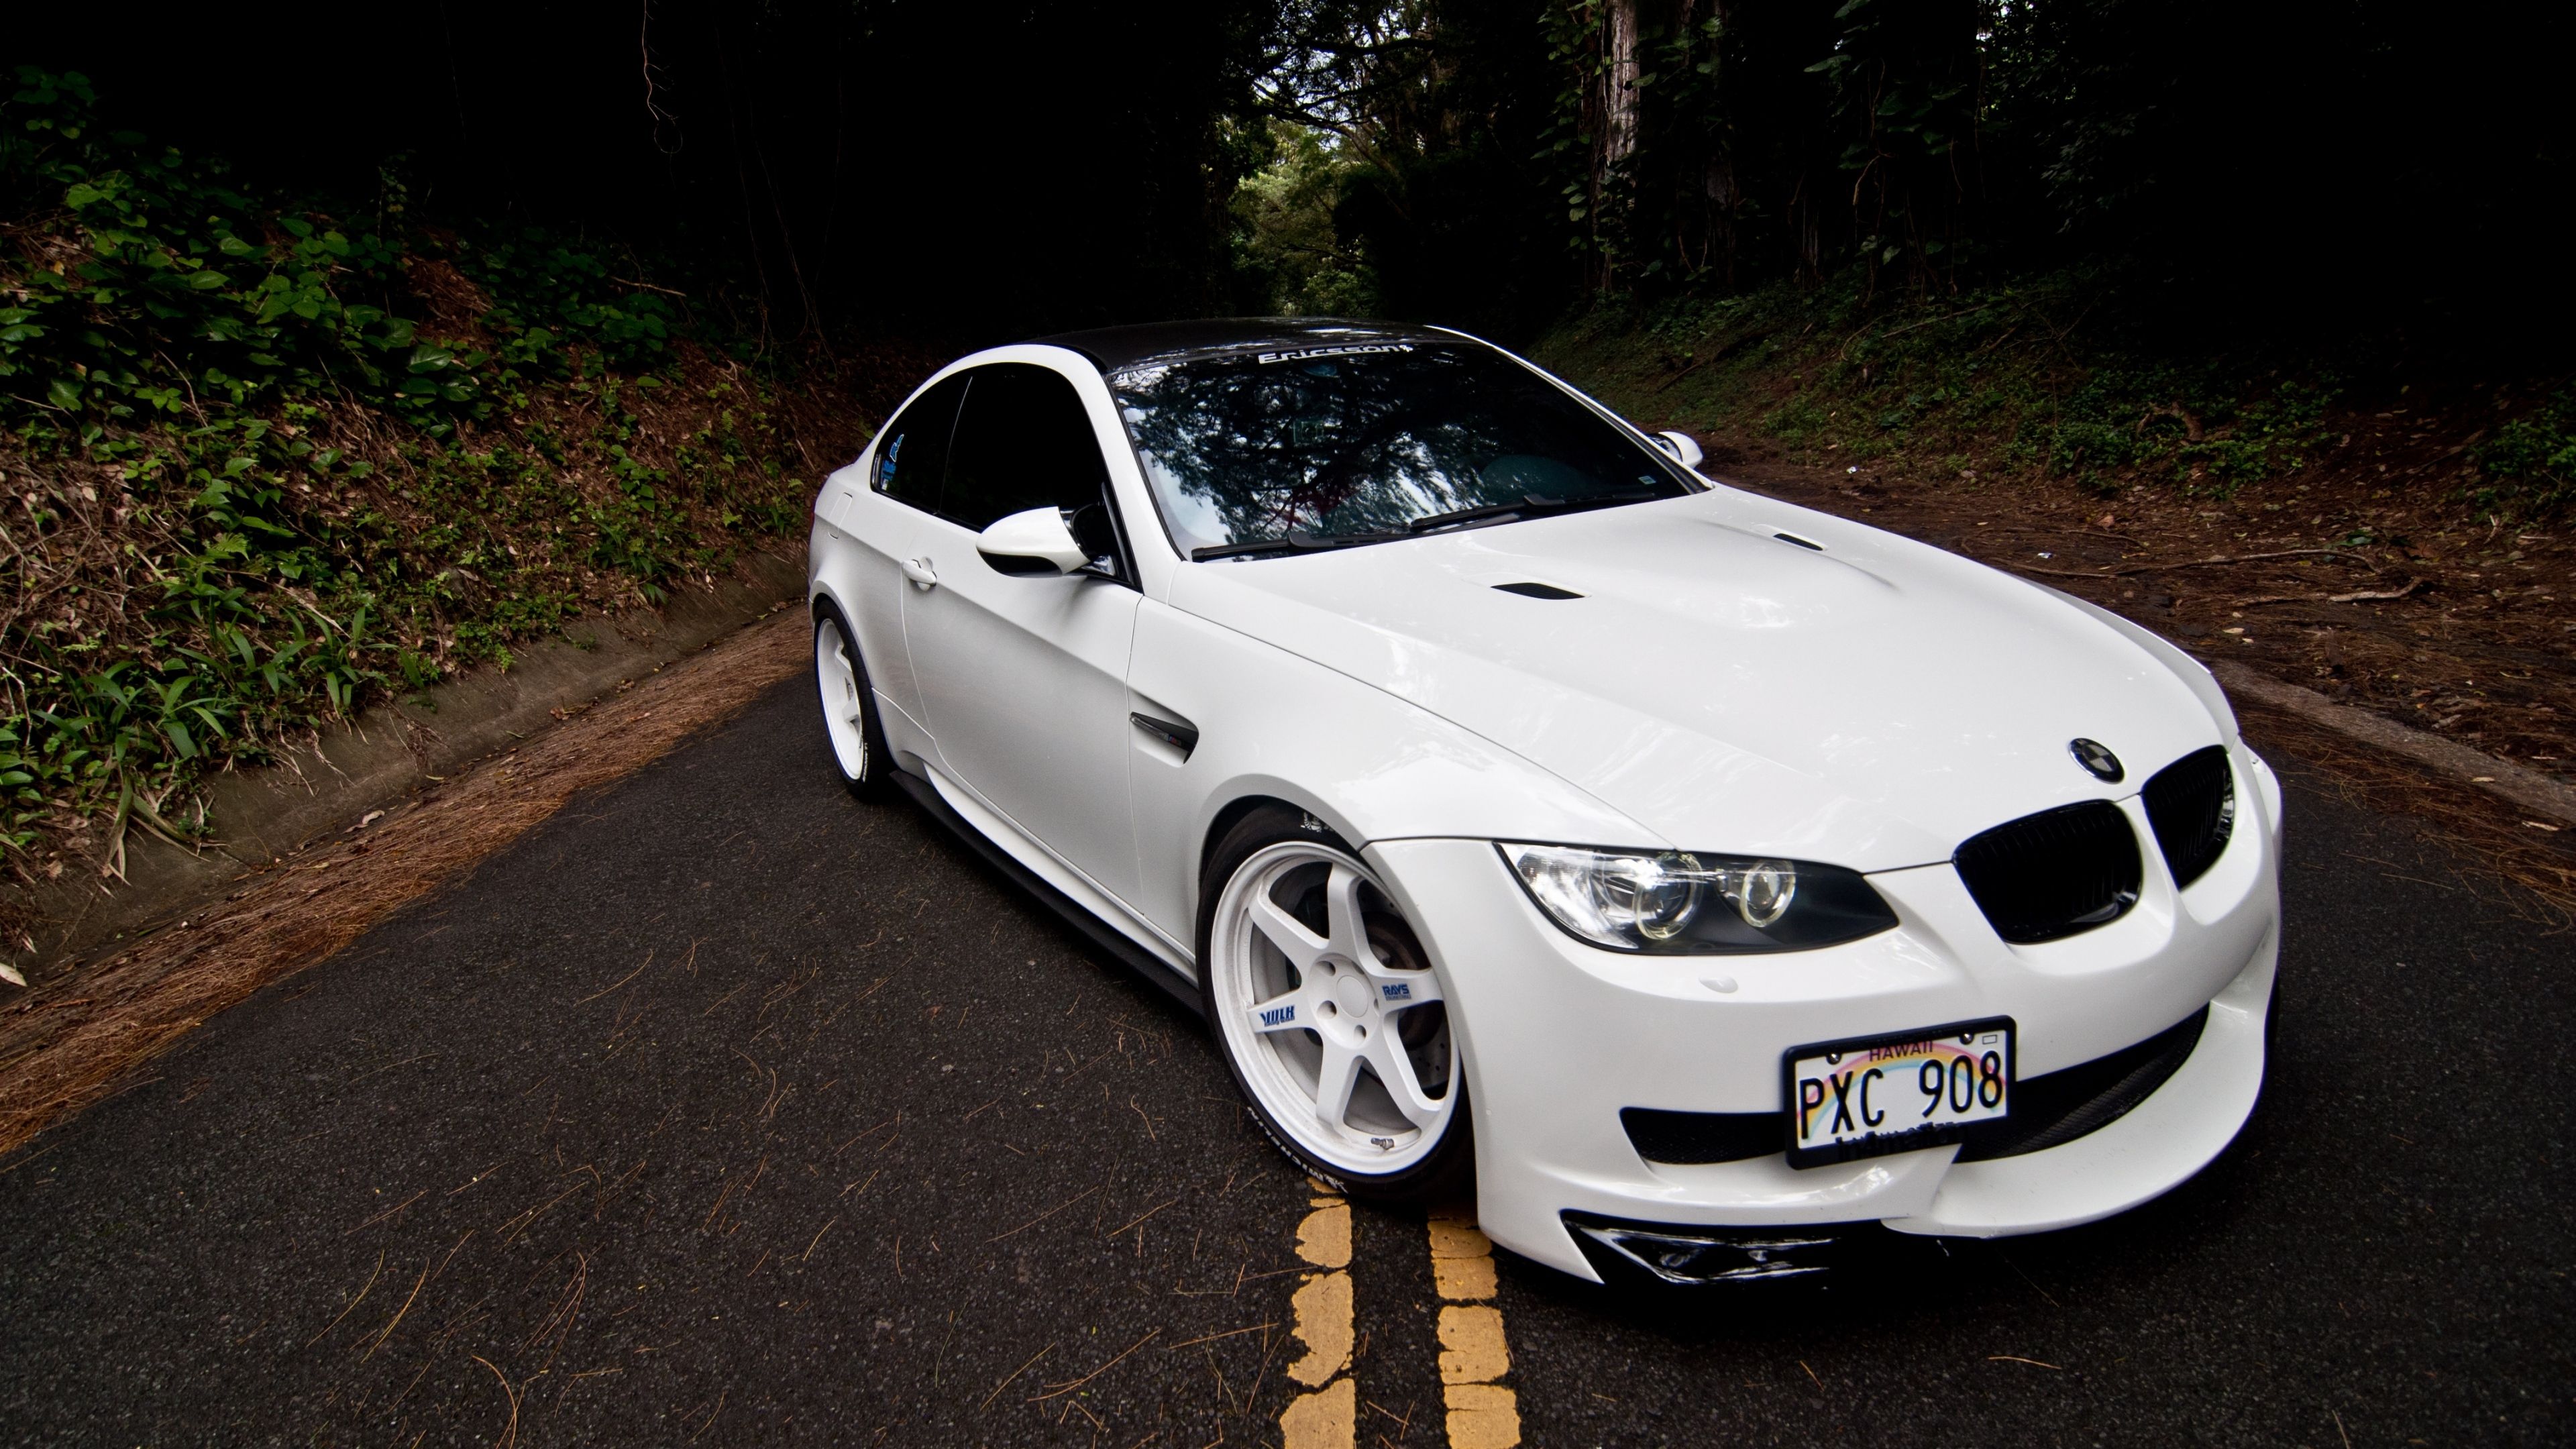 Wallpaper Of Wallpaperbmw White Coupe Hood Bmw HD Pics Mobile Phones